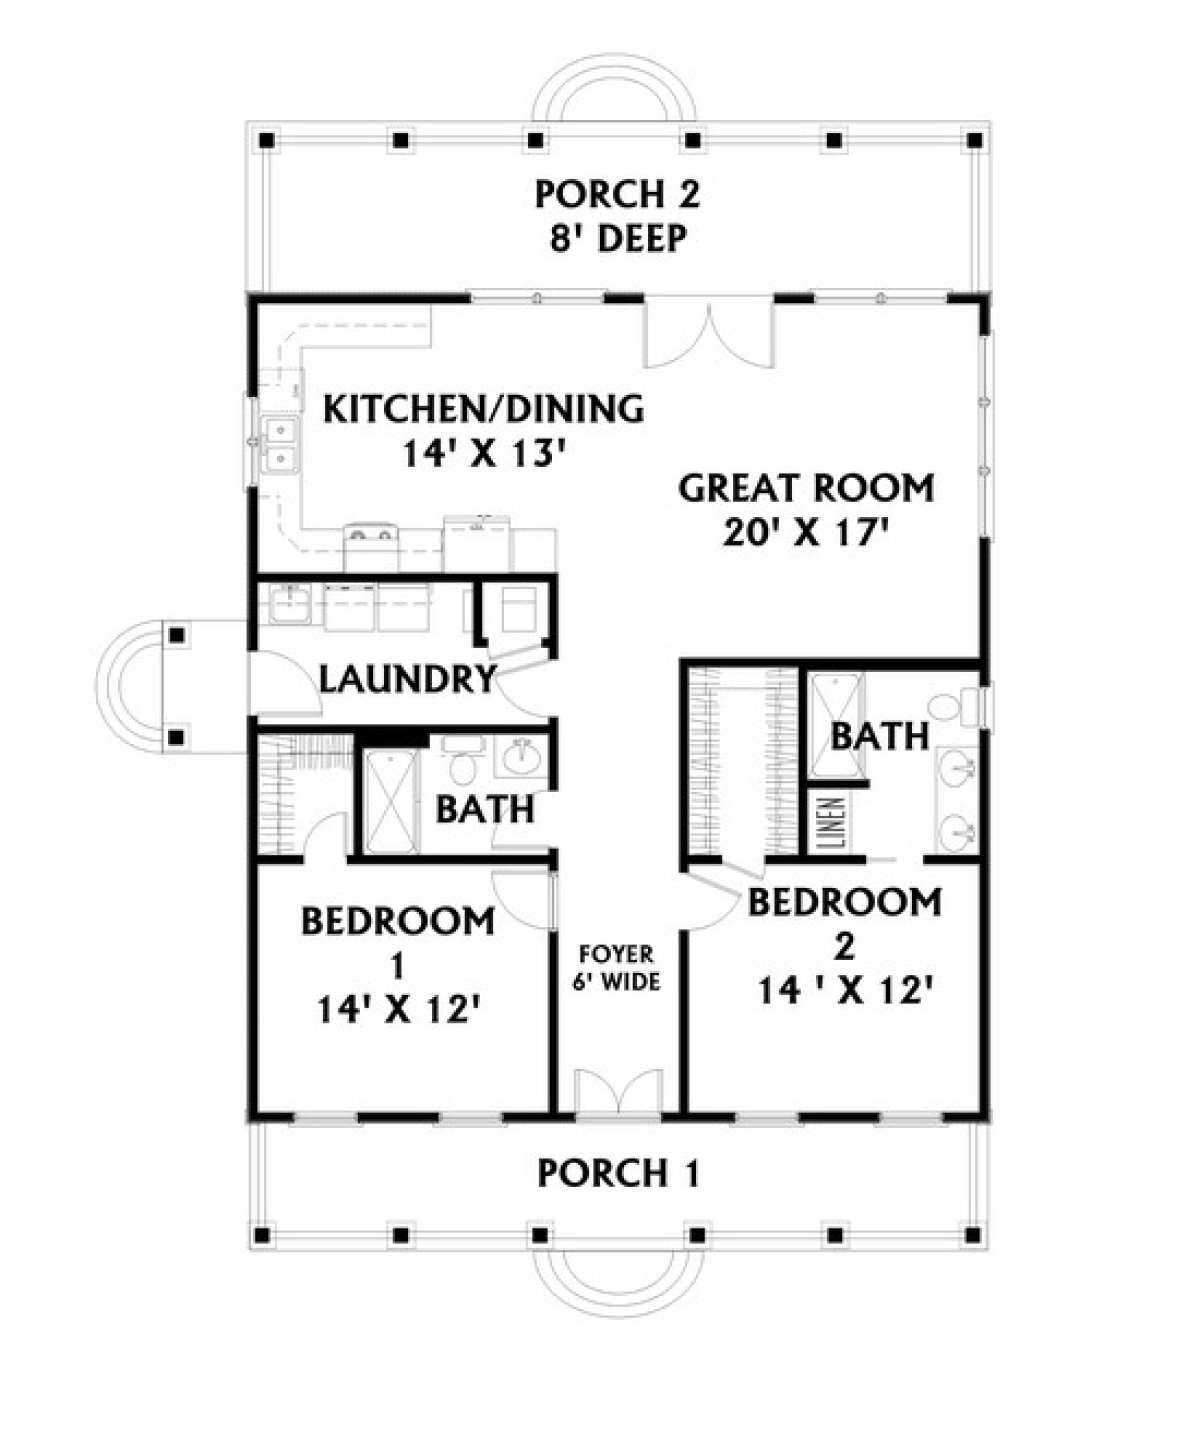 480 Sq Ft House Plan - 2 Bed, 1 Bath Small Vacation Home